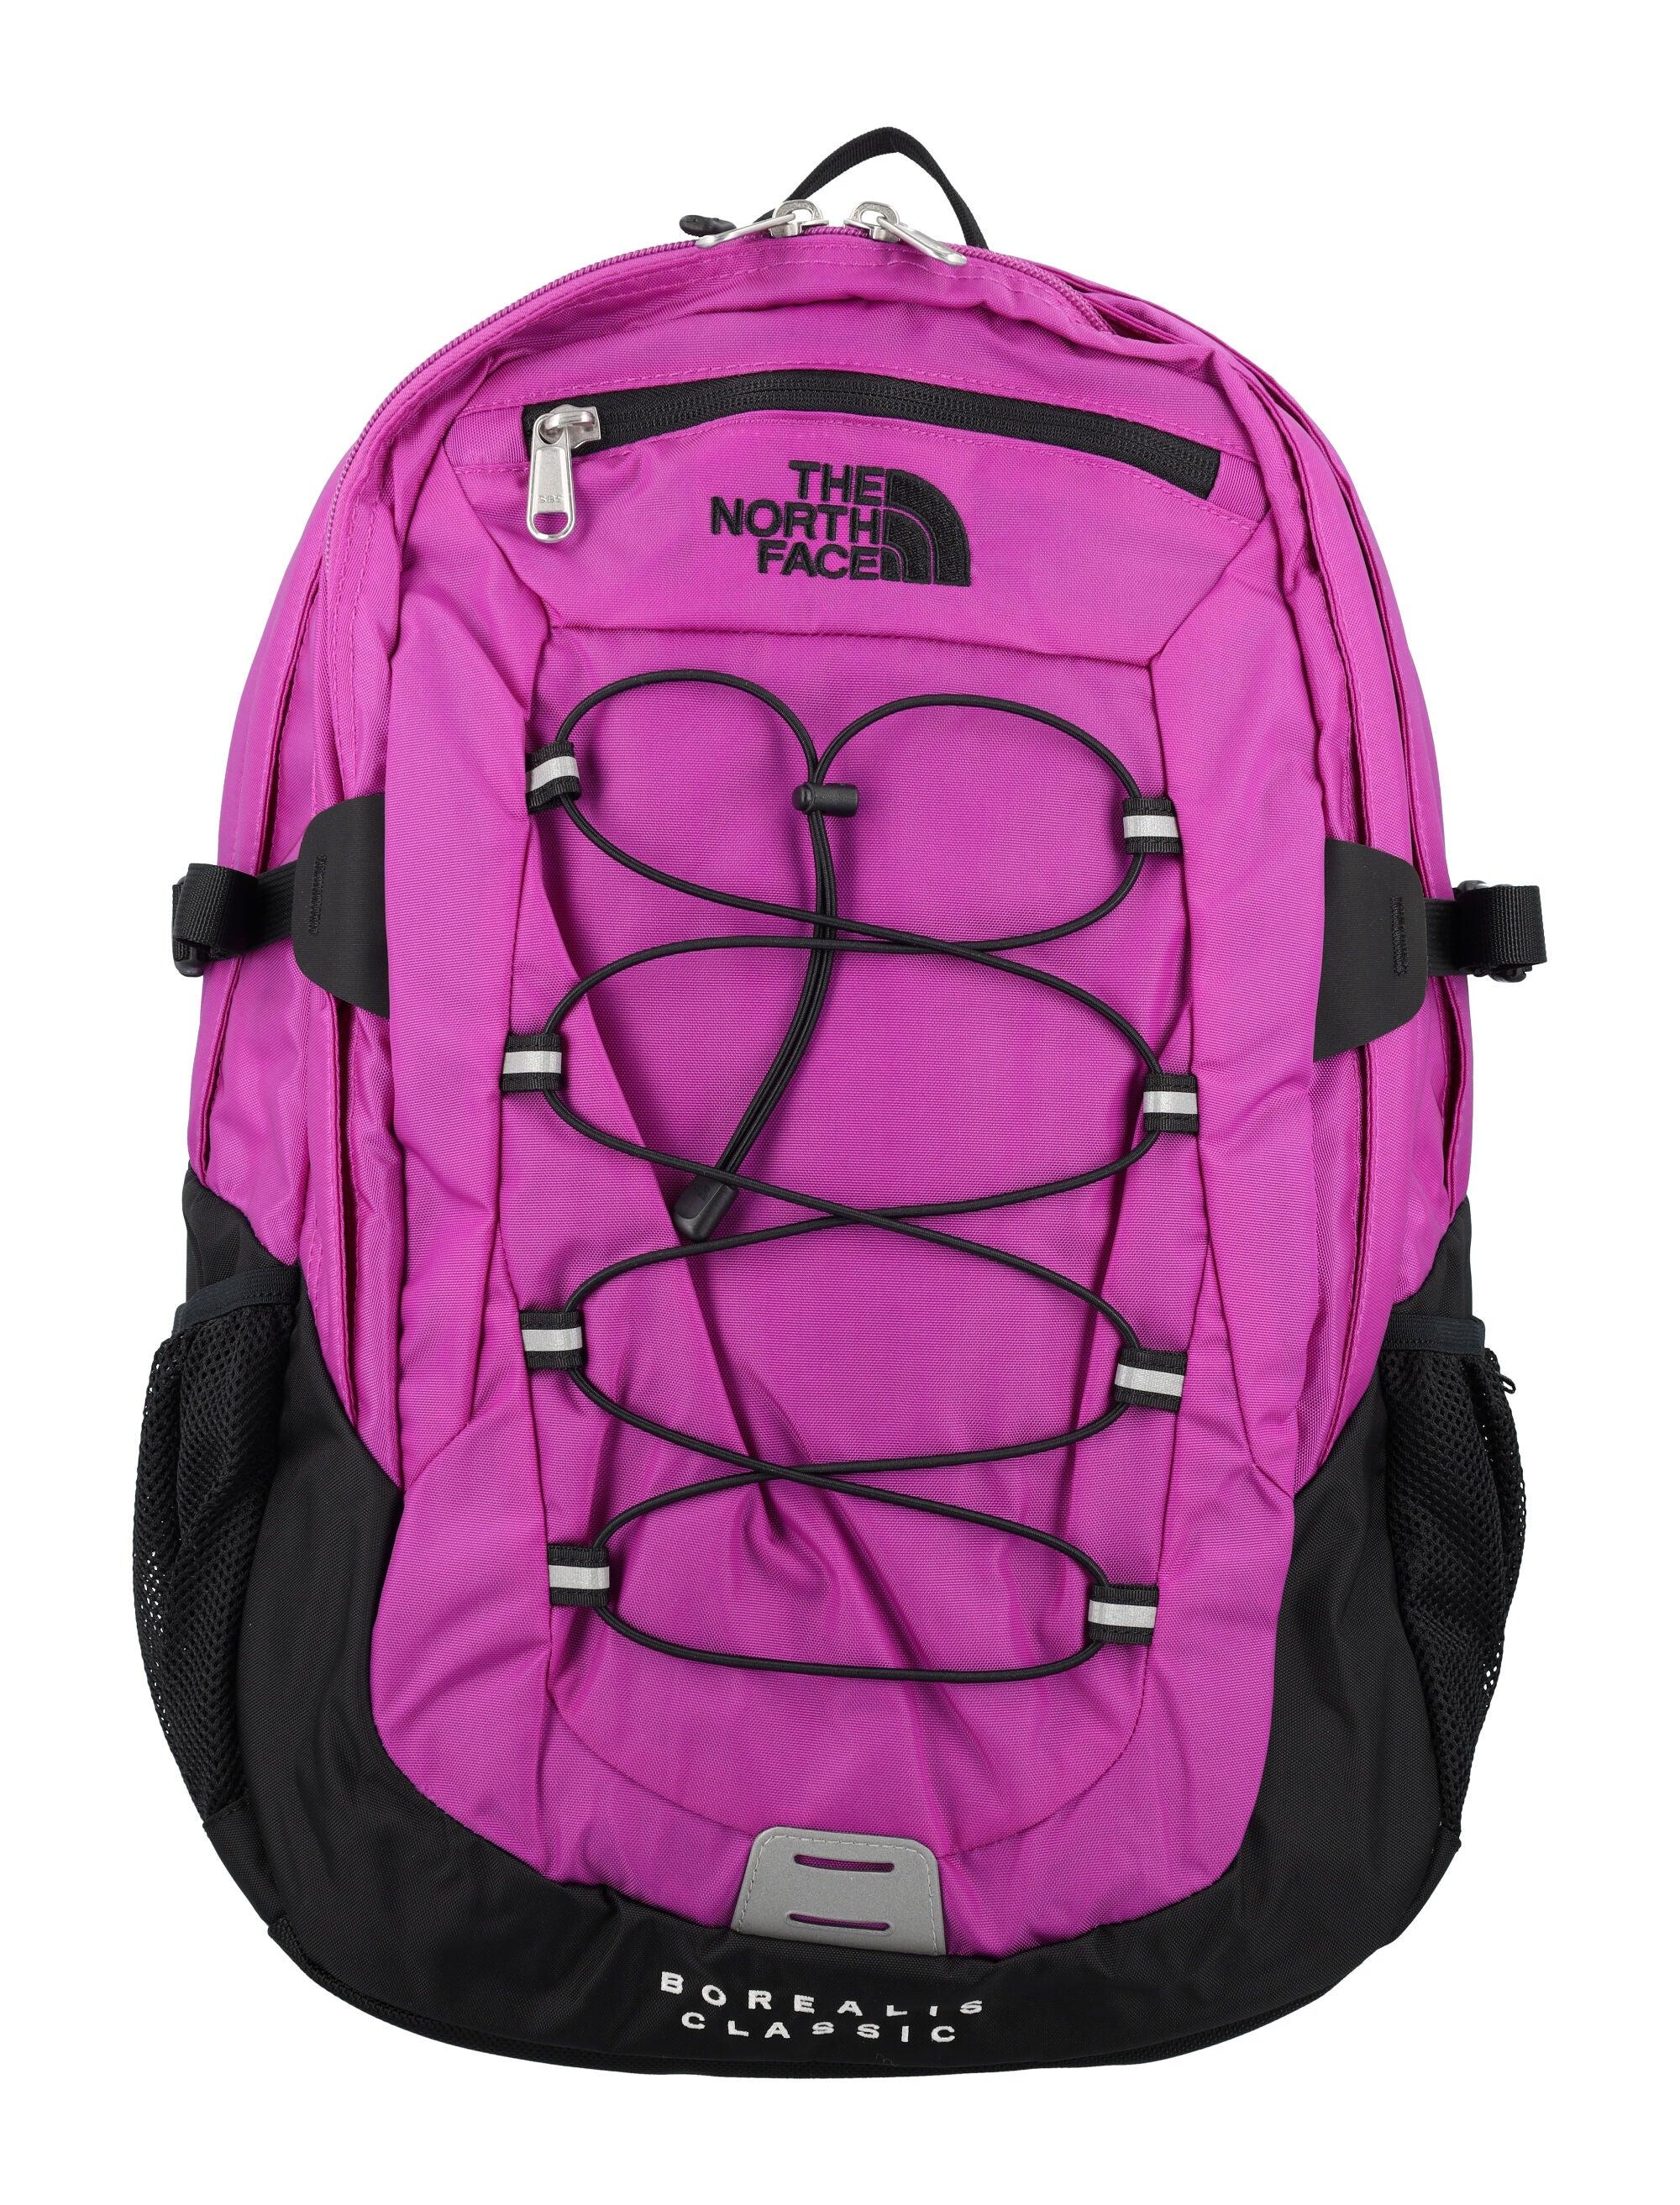 The North Face Borealis Classic Backpack in Pink for Men | Lyst